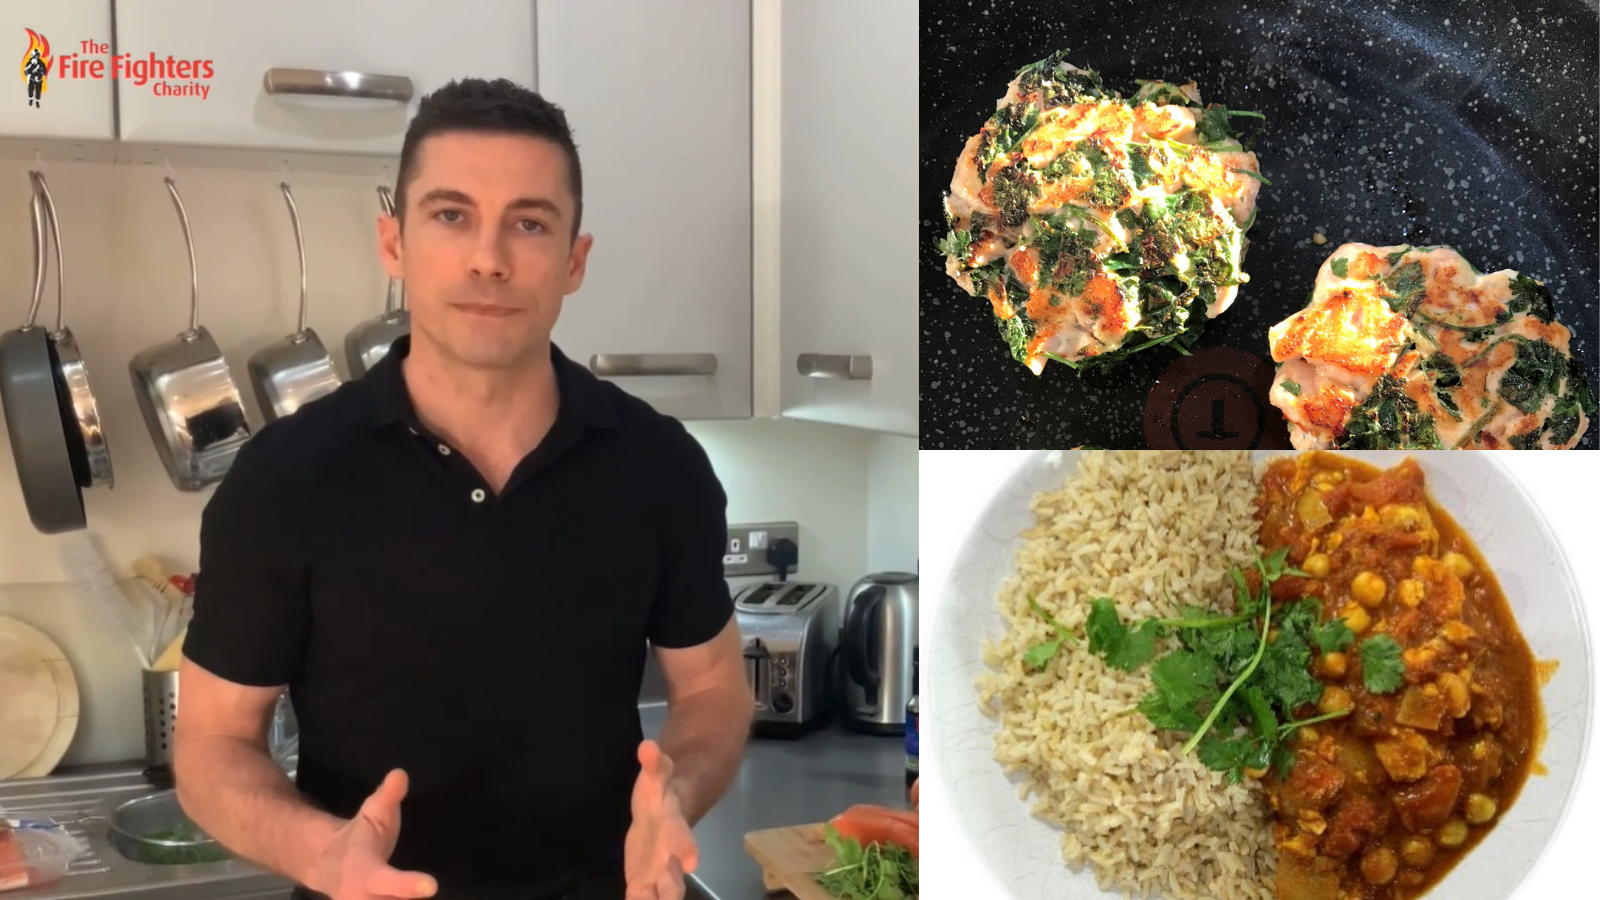 Healthy joints: Try our recipes and cook-along videos